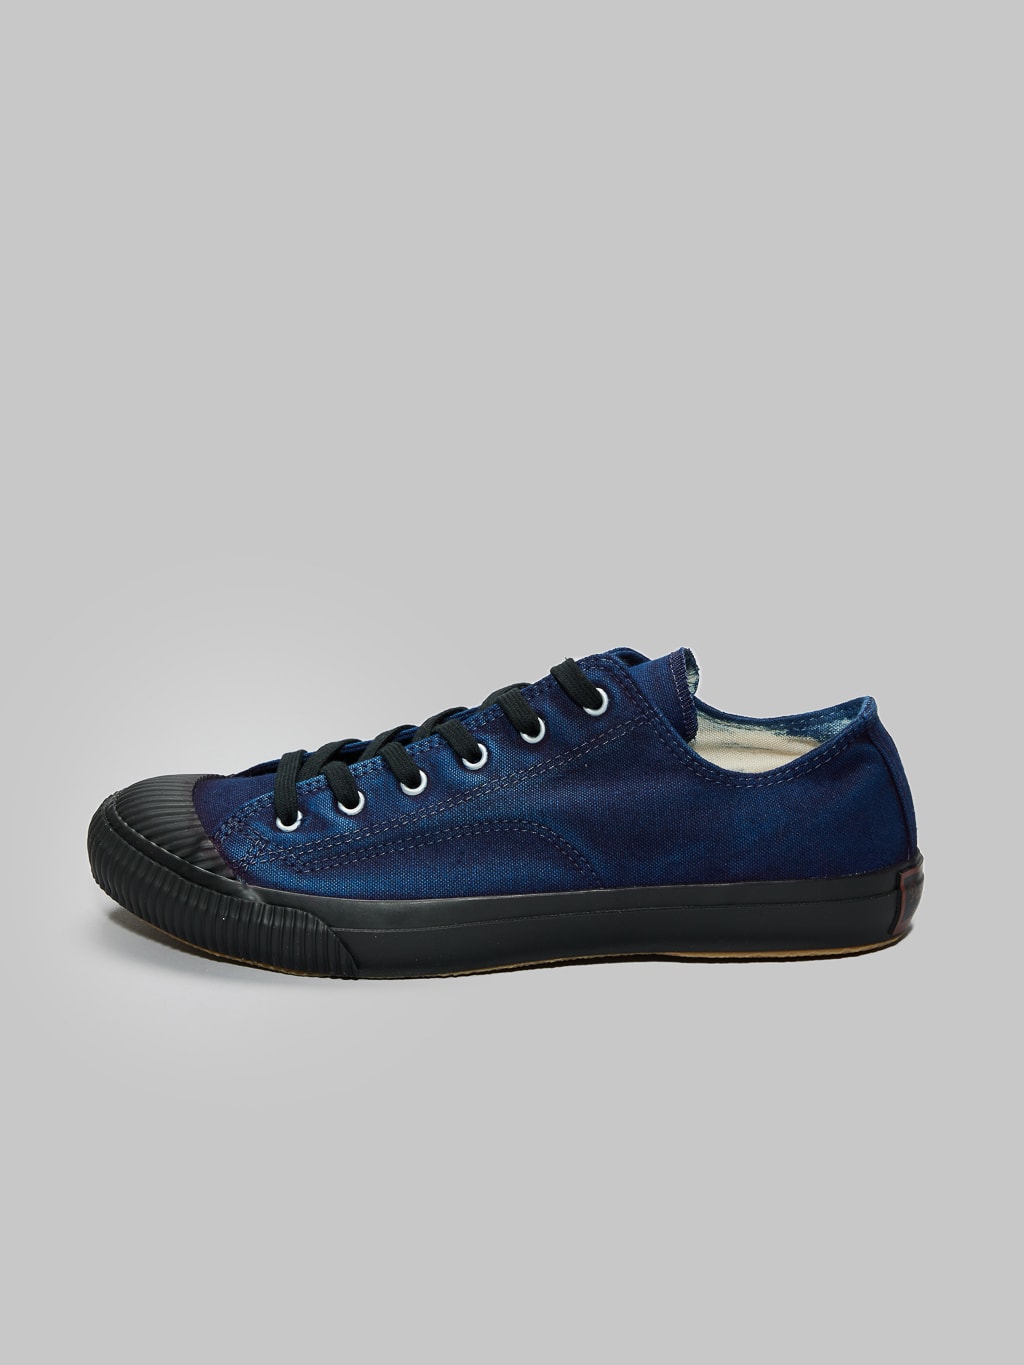 Pras shellcap low sneakers indigo hand dyed made in japan